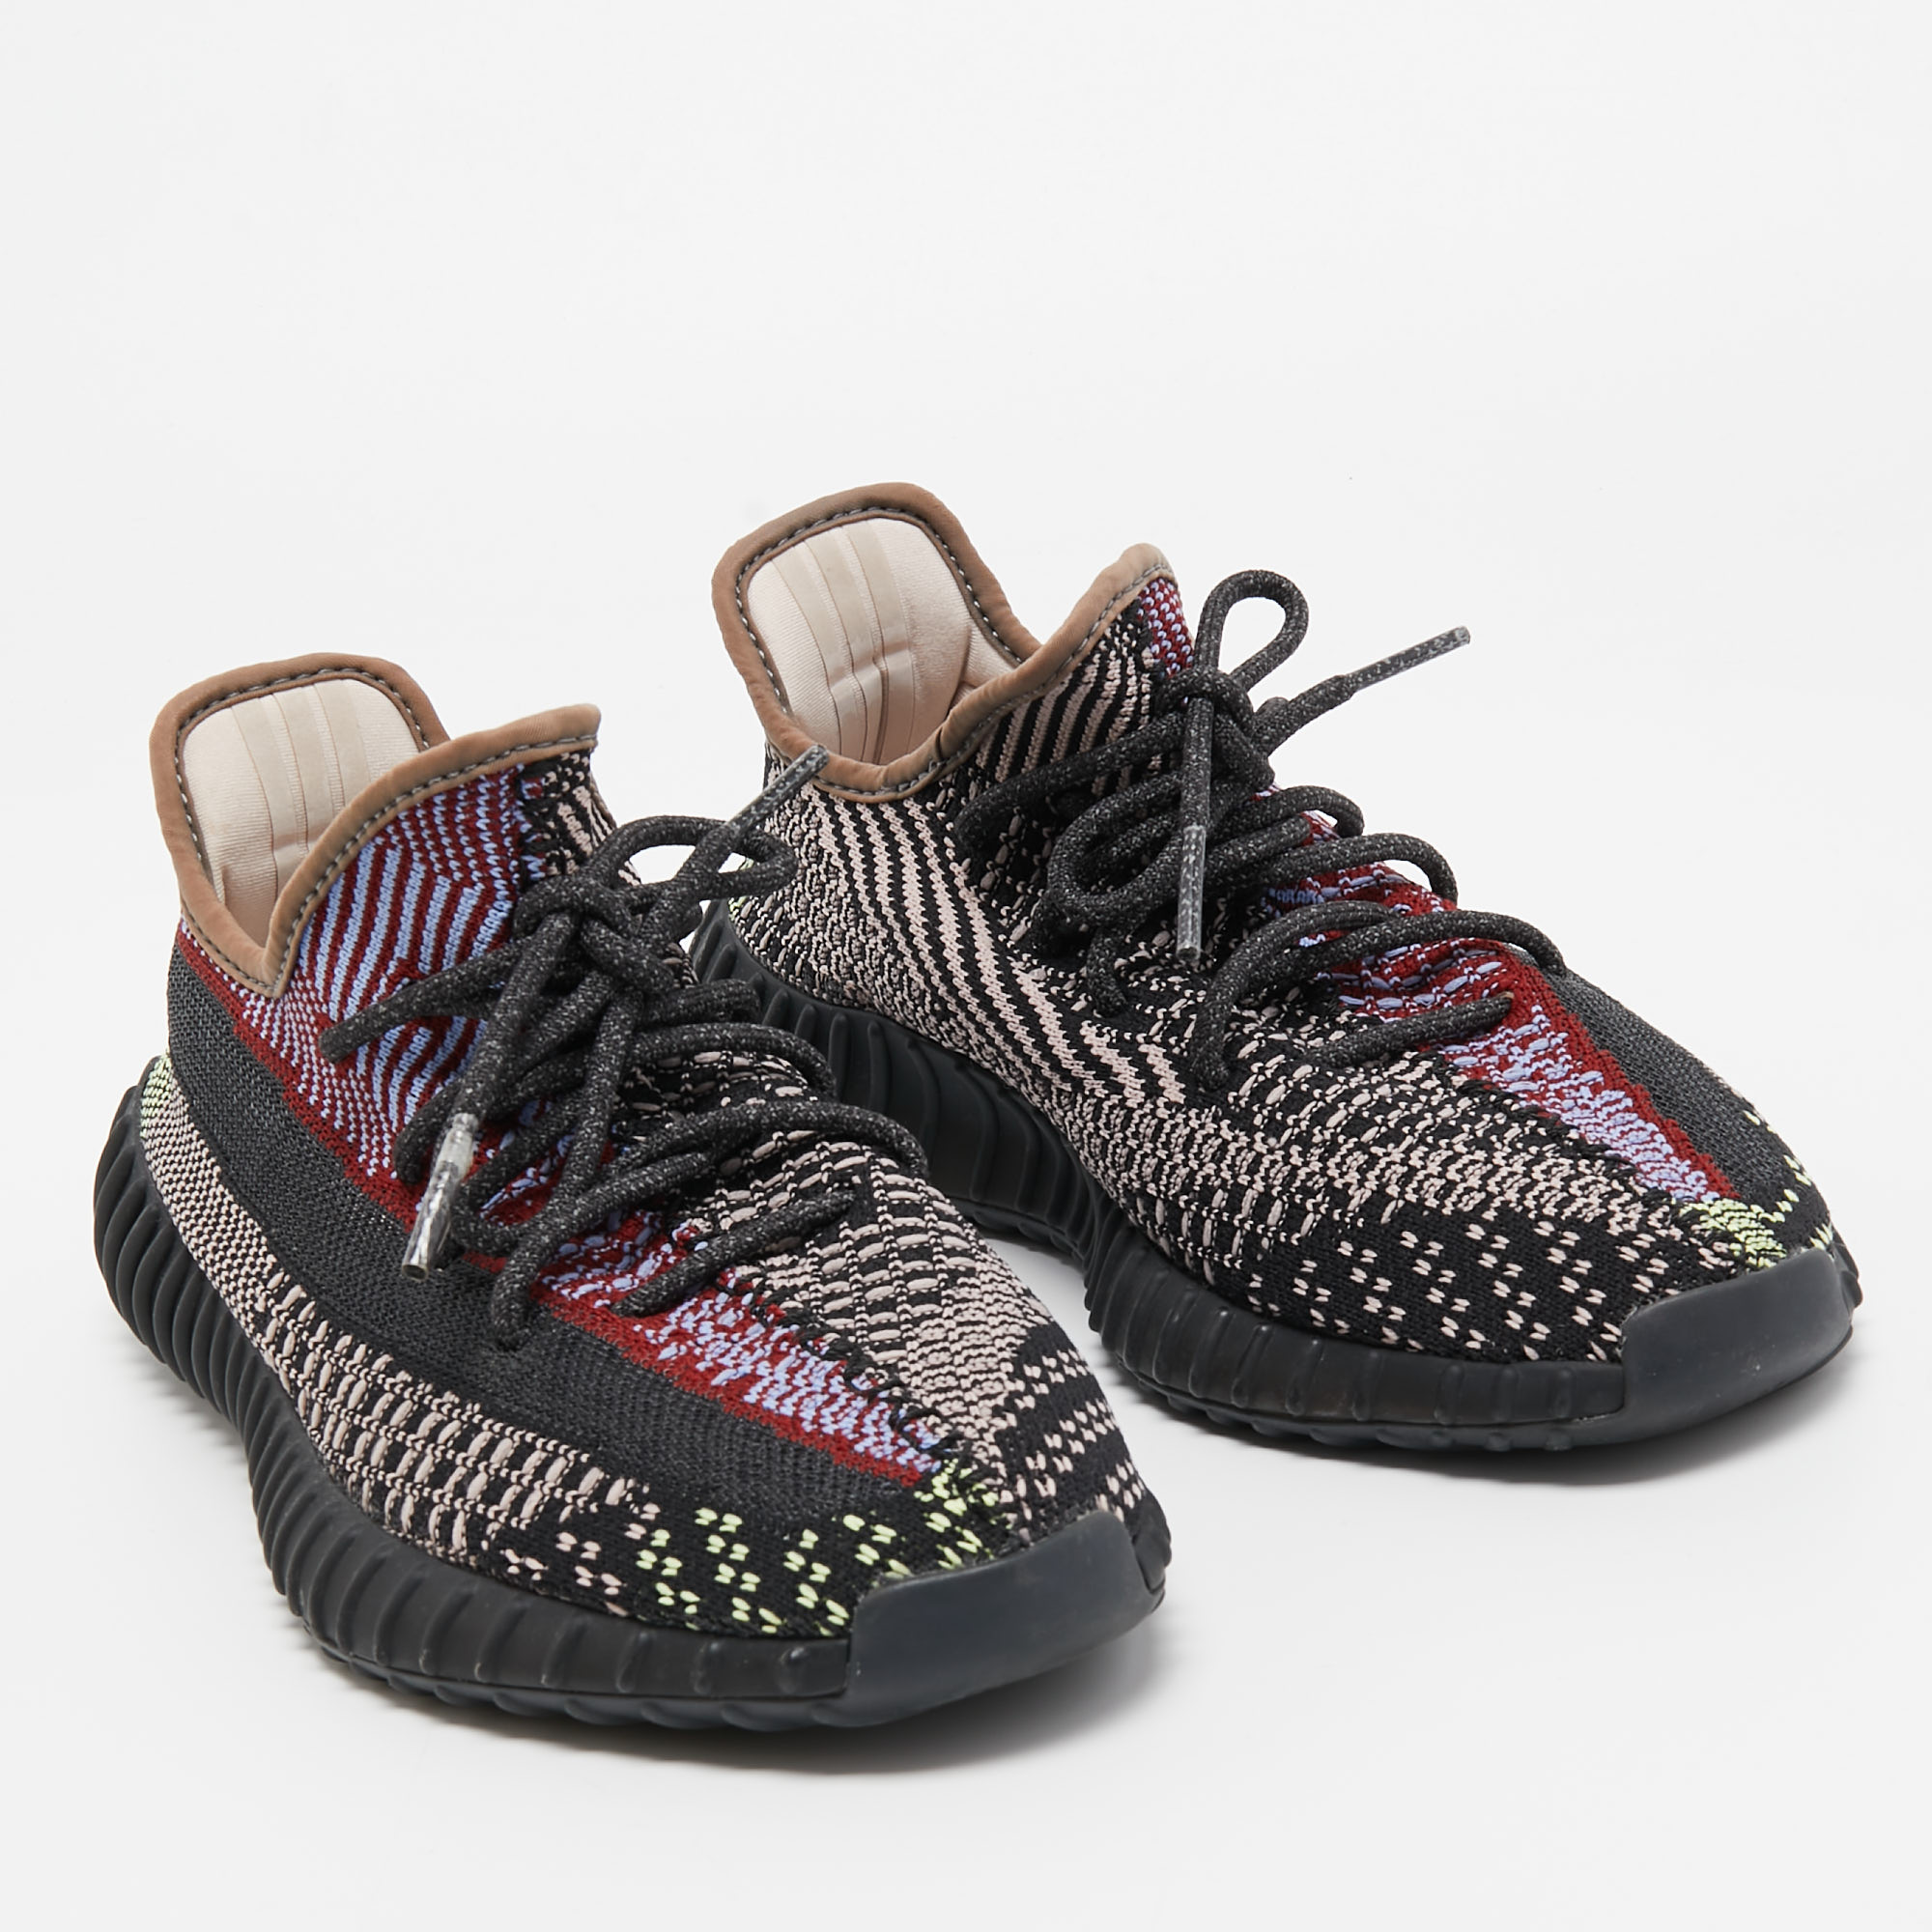 Yeezy X Adidas Multicolor Knit Fabric Boost 350 V2 Yecheil (Non-Reflective) Sneakers Size 41 1/3